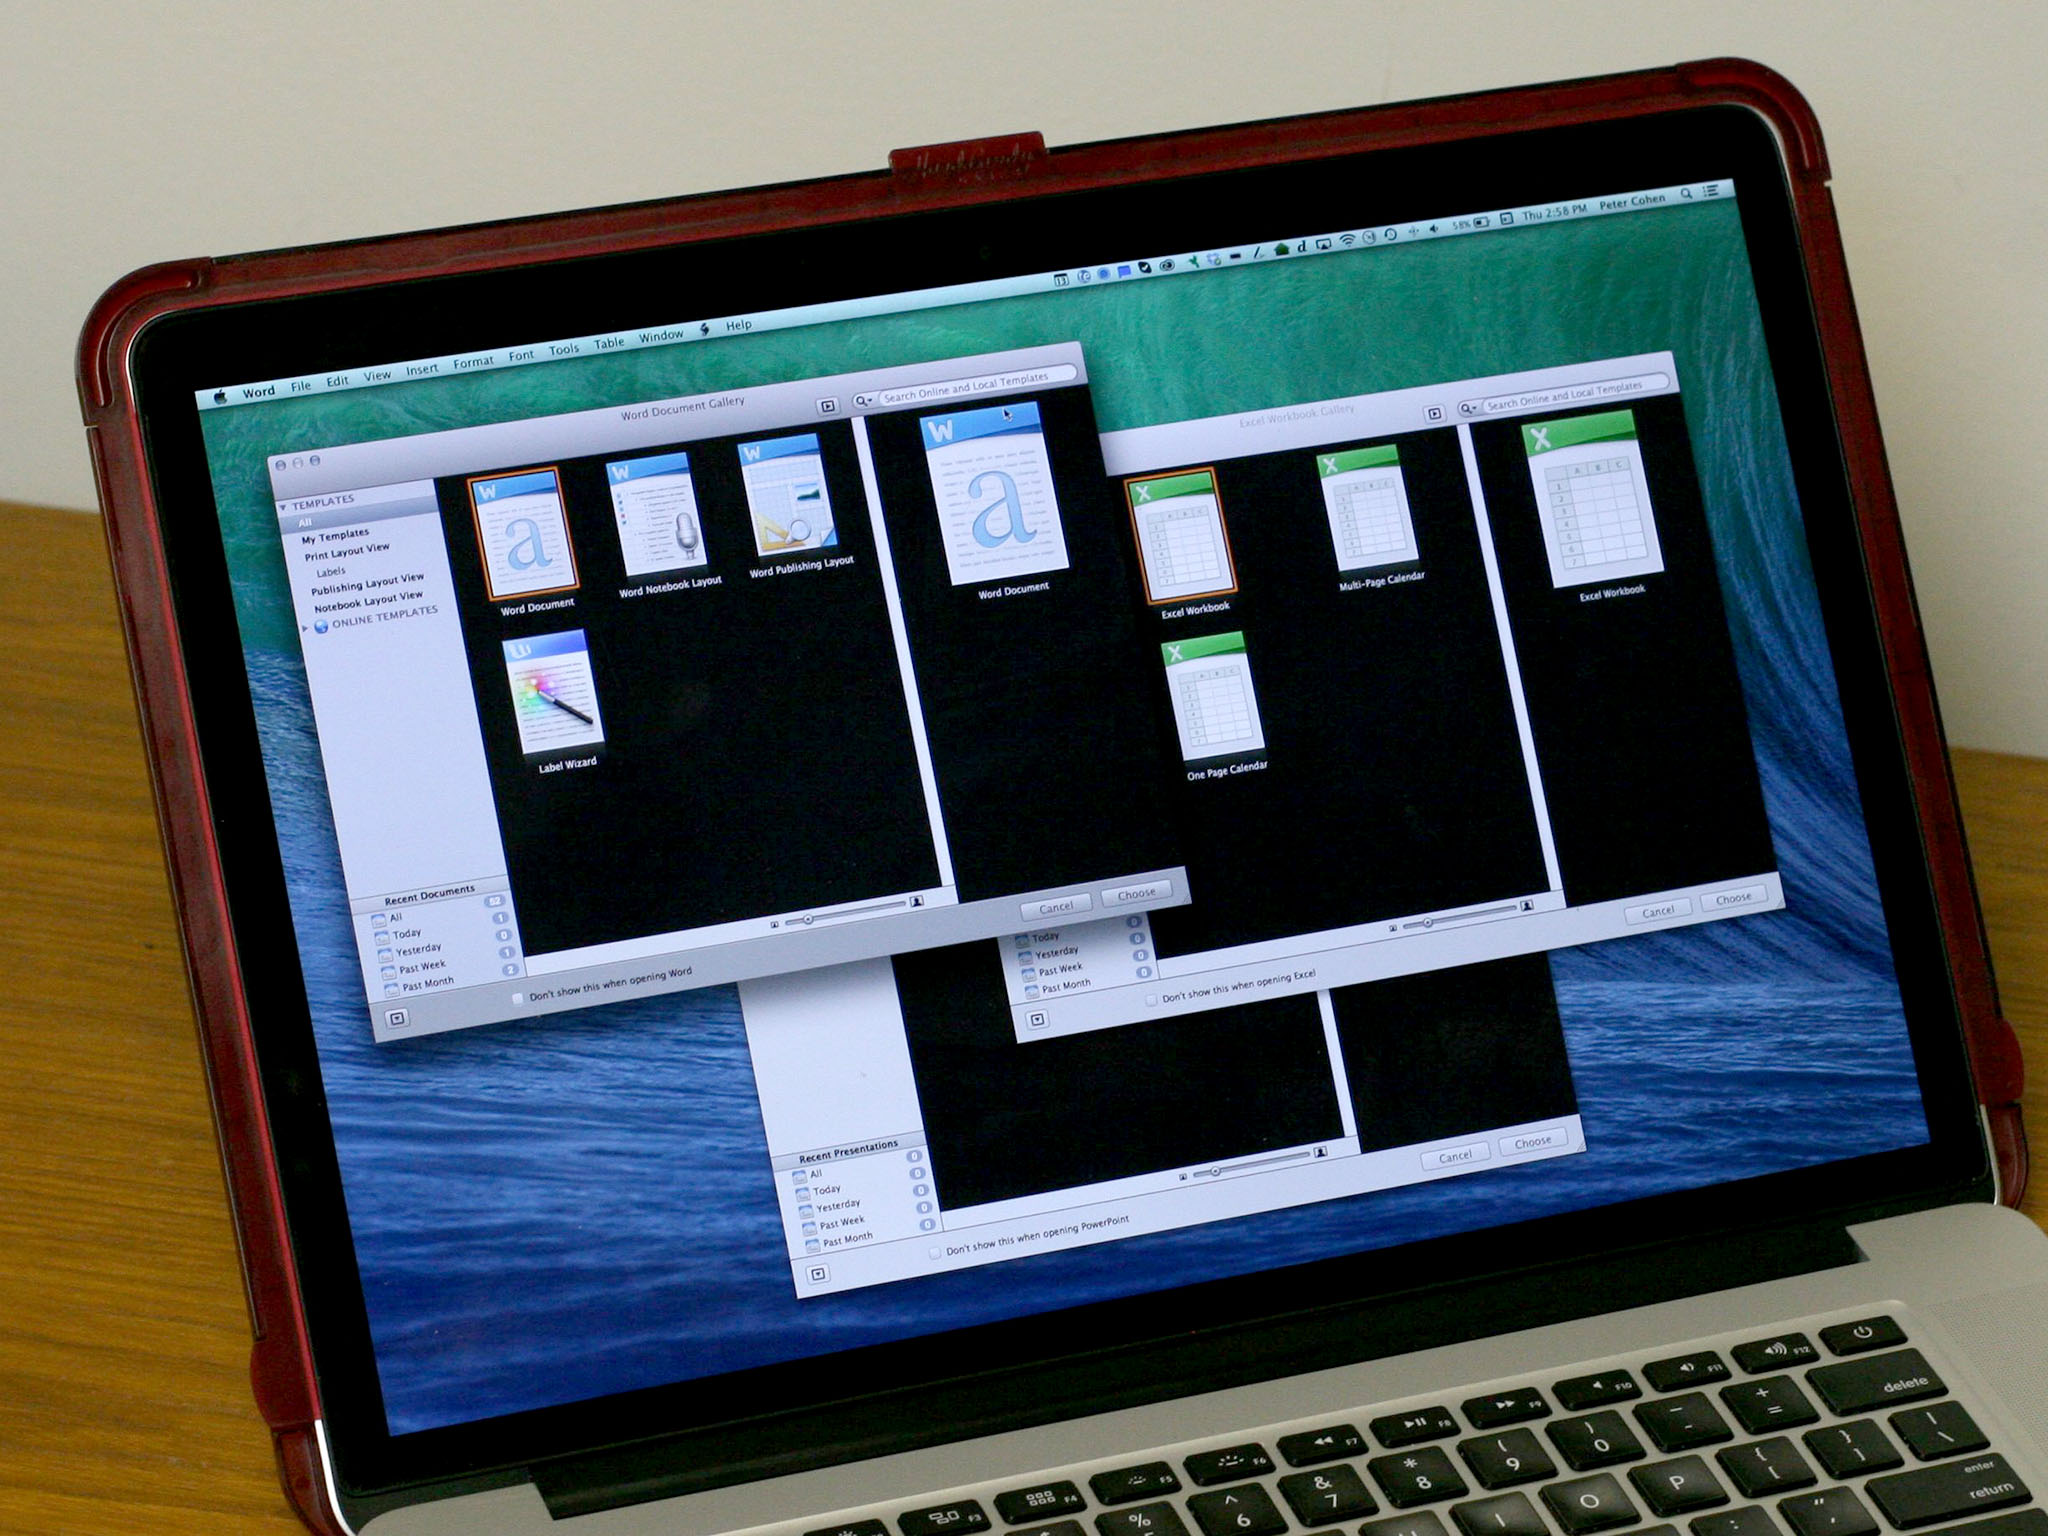 Office for Mac 2011 update patches critical vulnerabilities